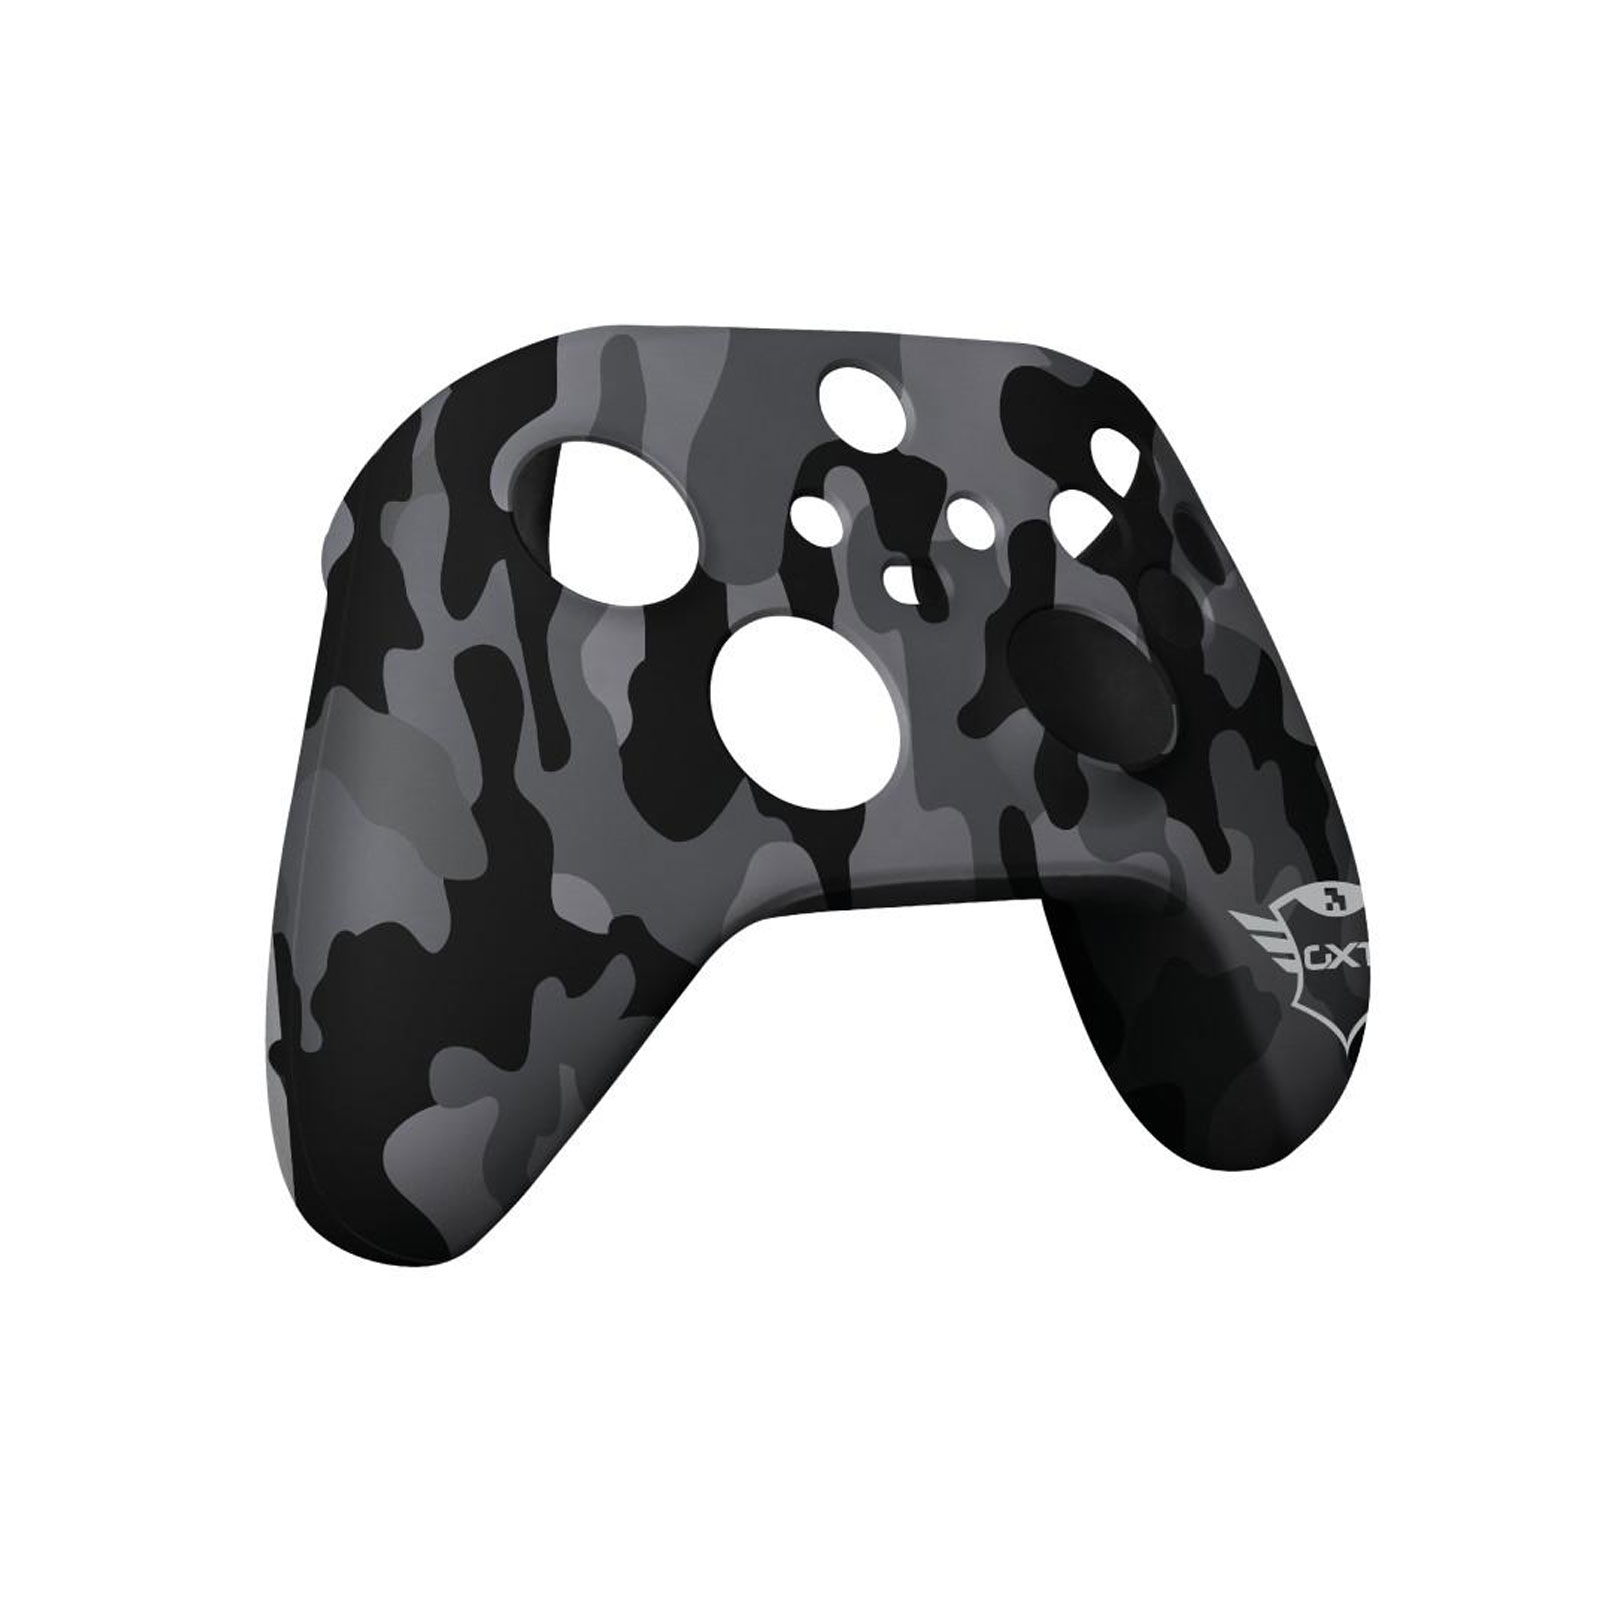 Trust GXT 749 Controller Silicon Skin XBOX